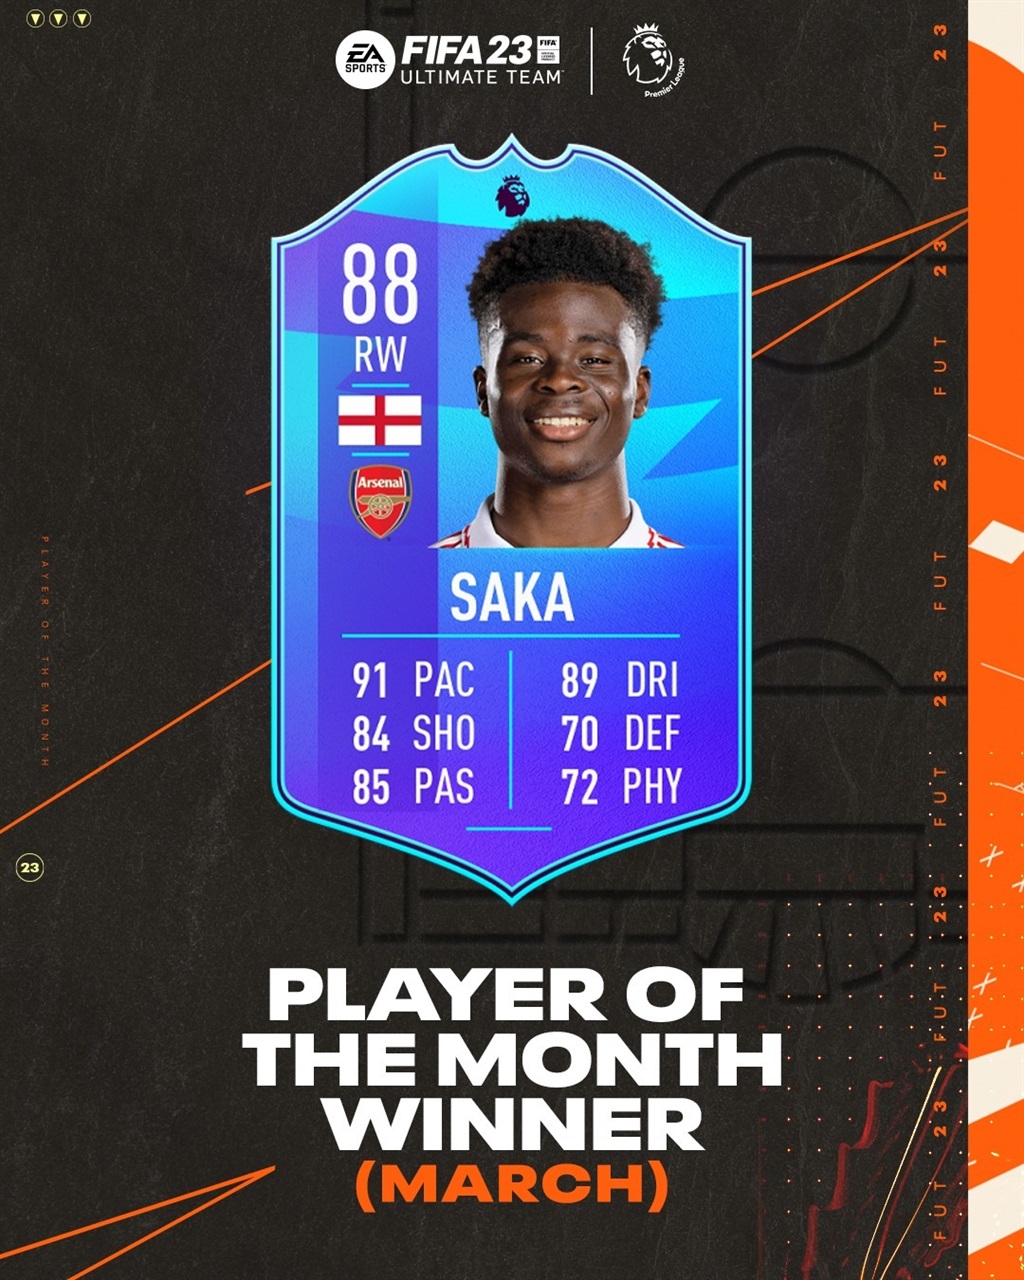 Bukayo Saka is the English Premier League's Player Of The Month for March. 